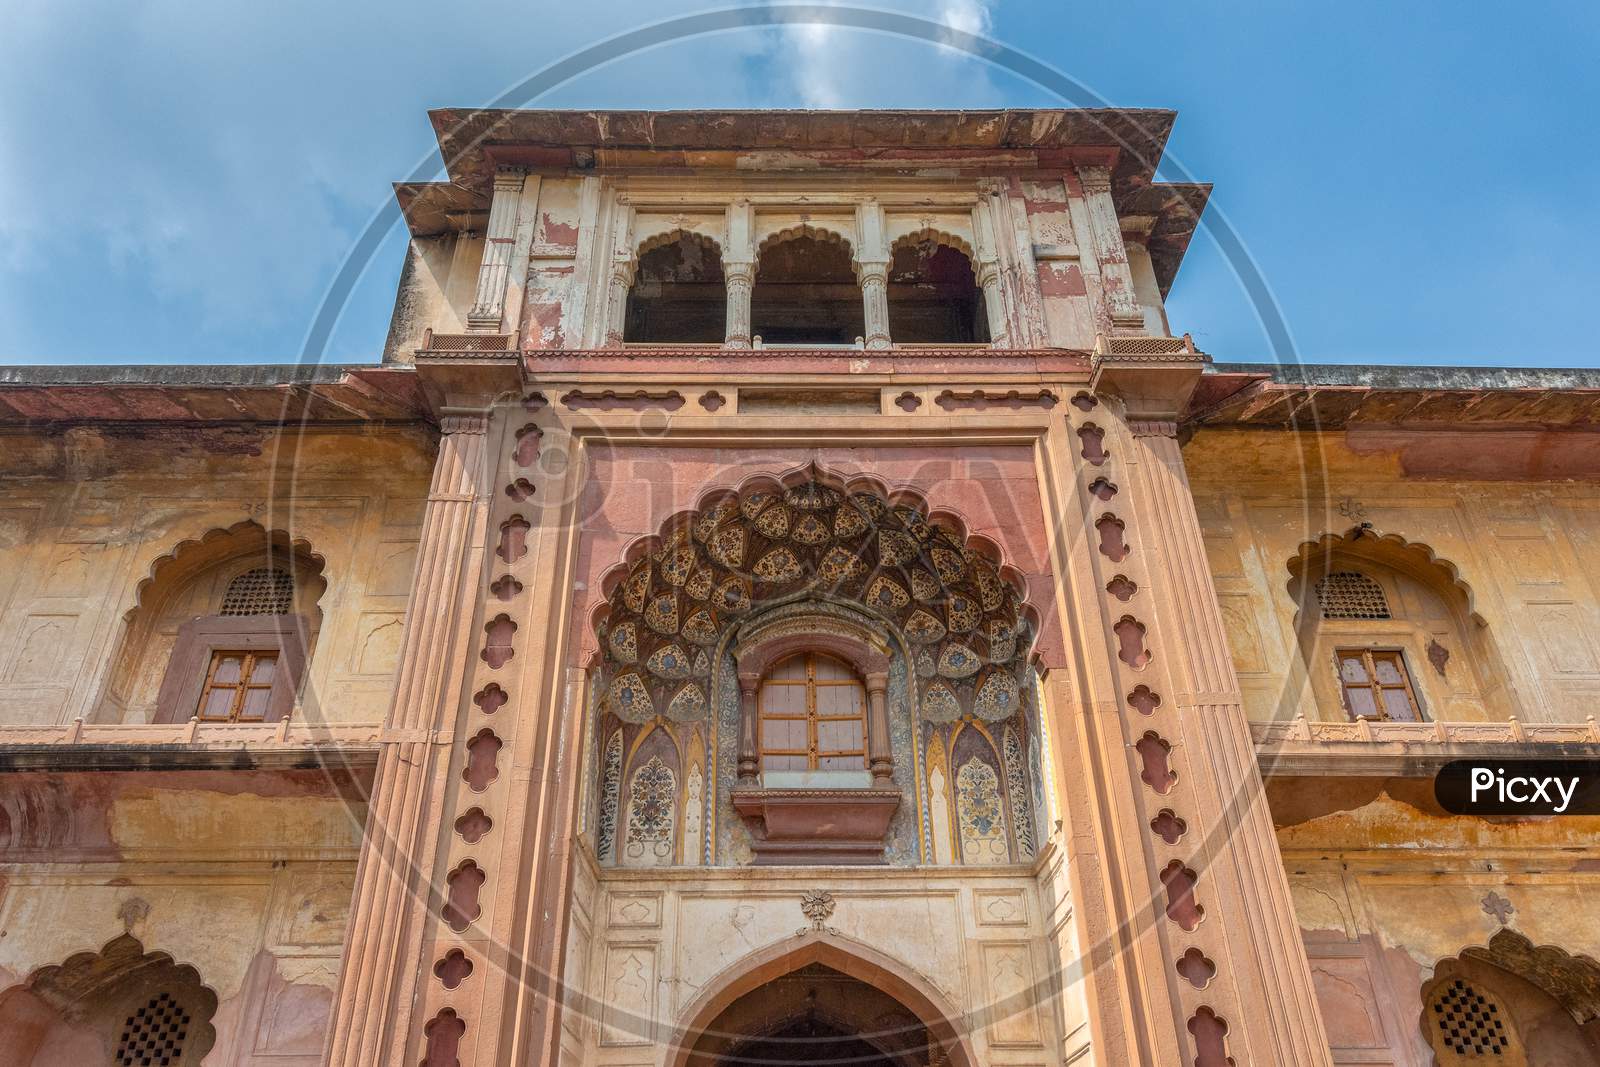 Entrance Gate To The Main Building Of Safdarjung'S Tomb, Mughal Style Mausoleum Built In 1754 In New Delhi, India